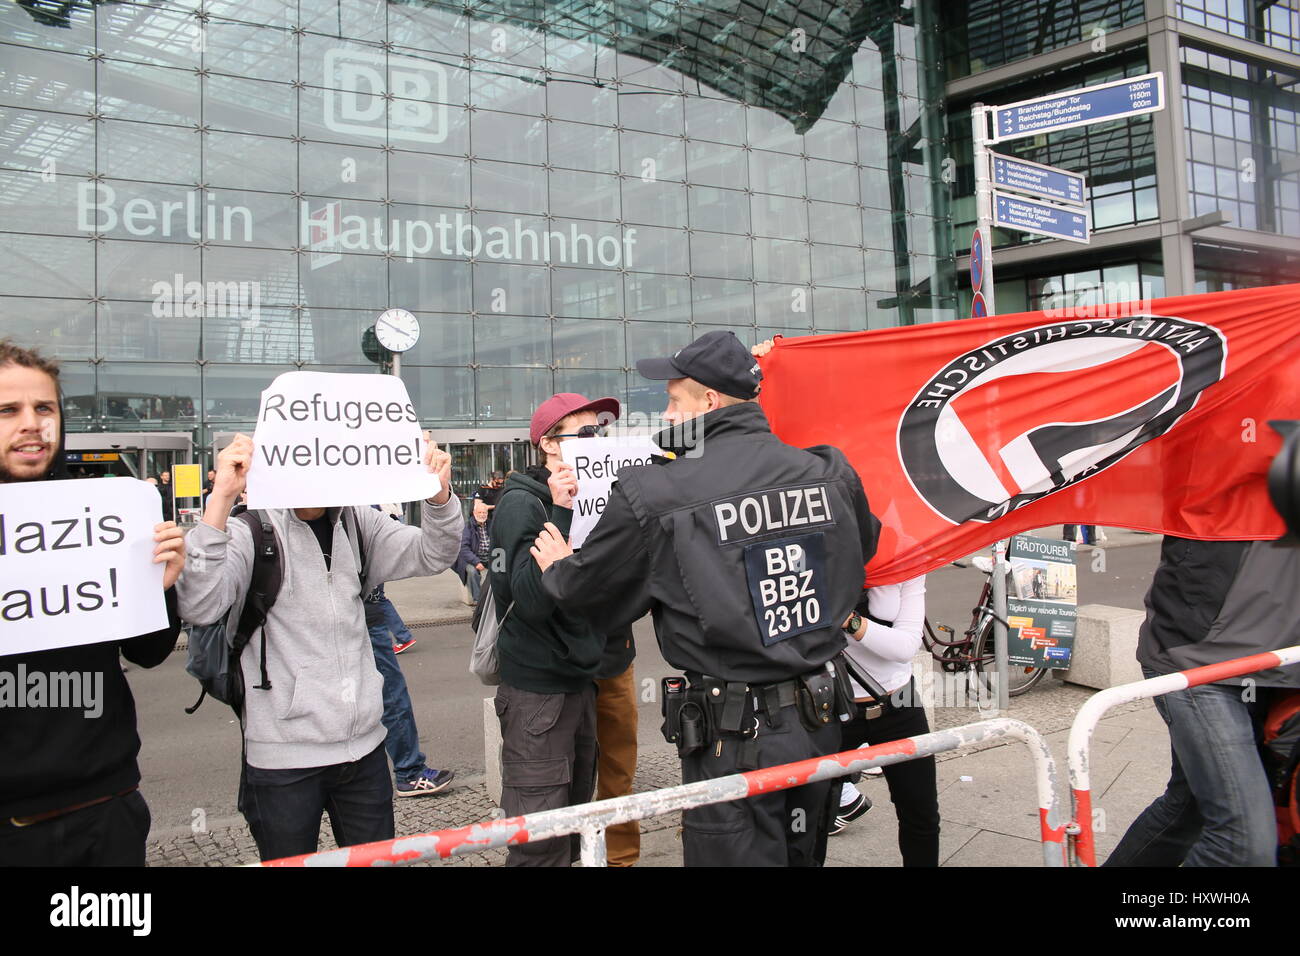 Berlin, Germany, May 9th, 2015: Antifa protesters clash with Pegida activists. Stock Photo